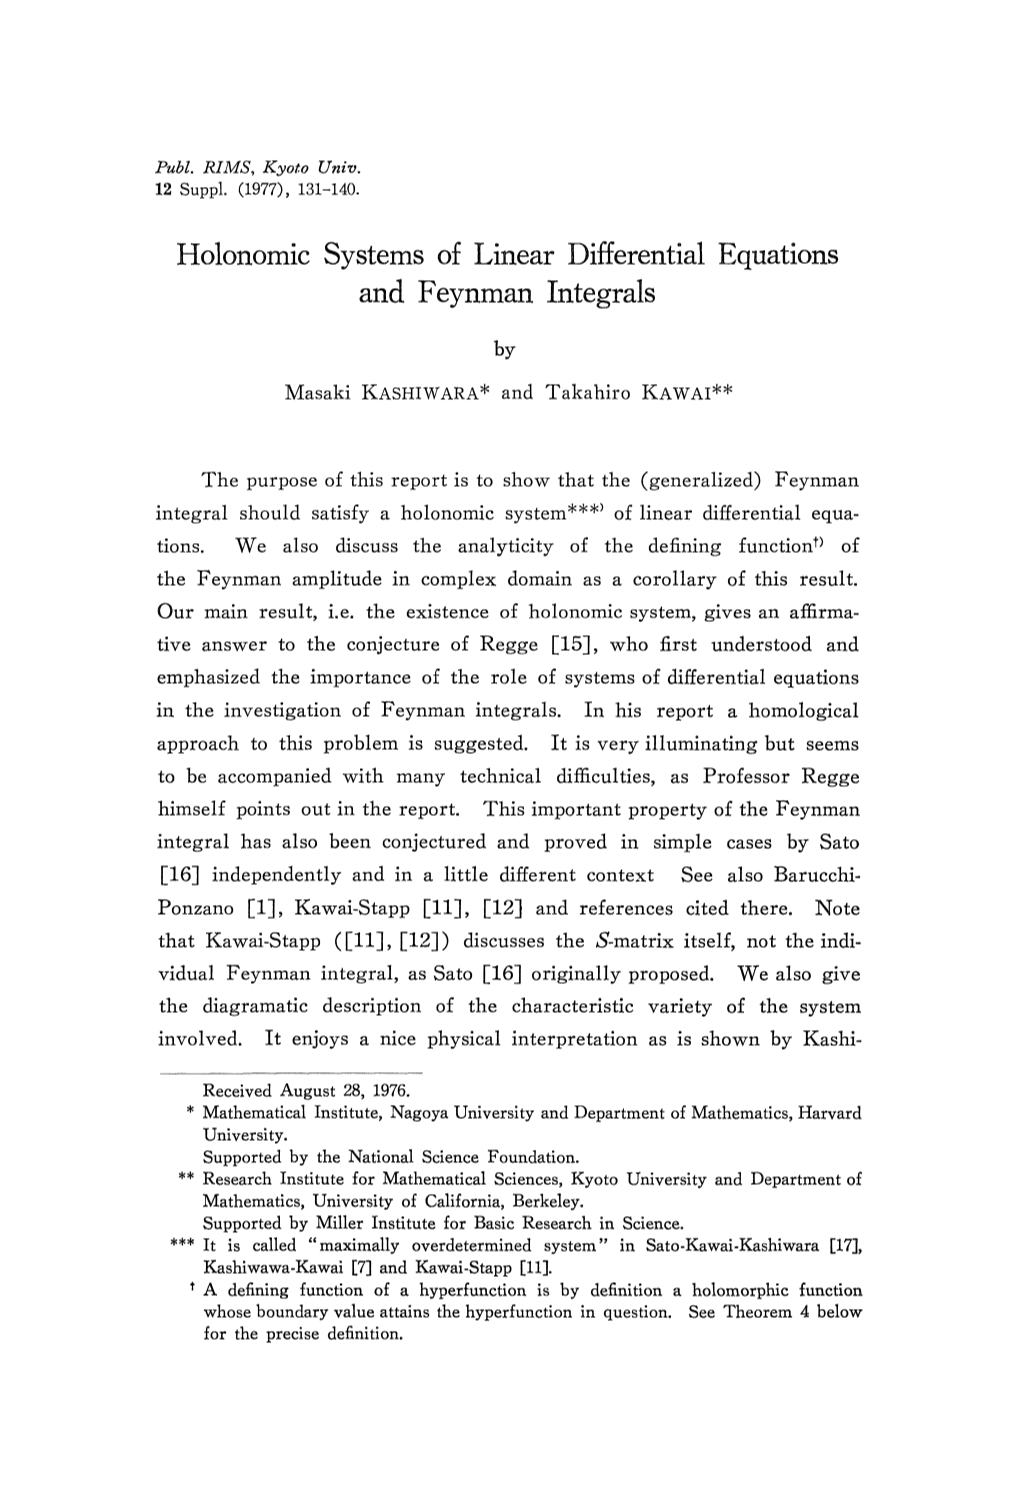 Holonomic Systems of Linear Differential Equations and Feynman Integrals